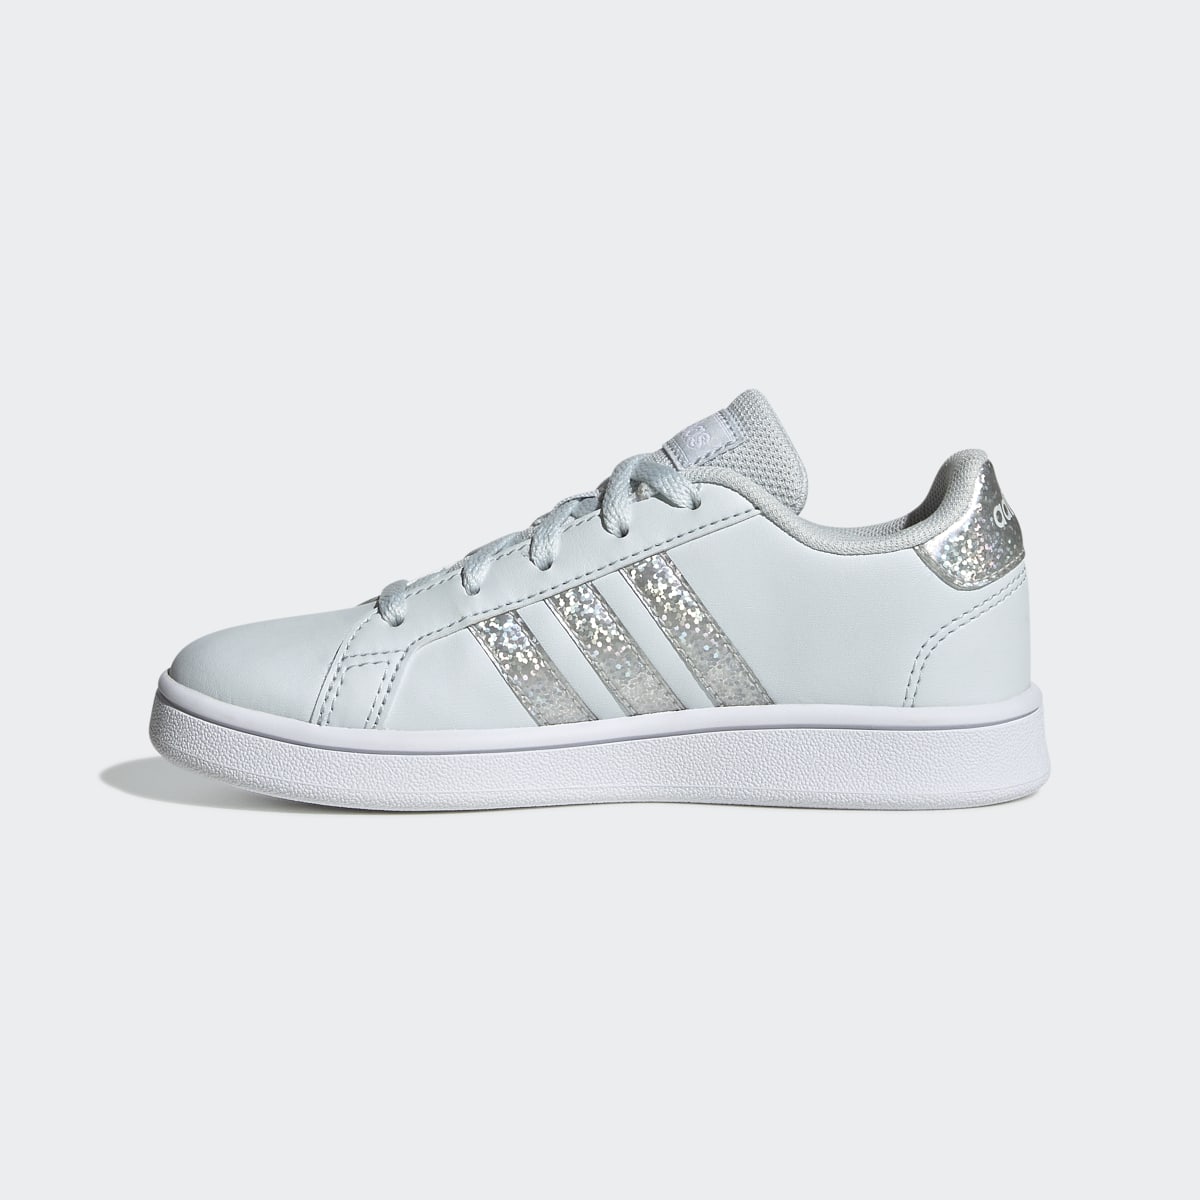 Adidas Grand Court Print Lace Shoes. 7